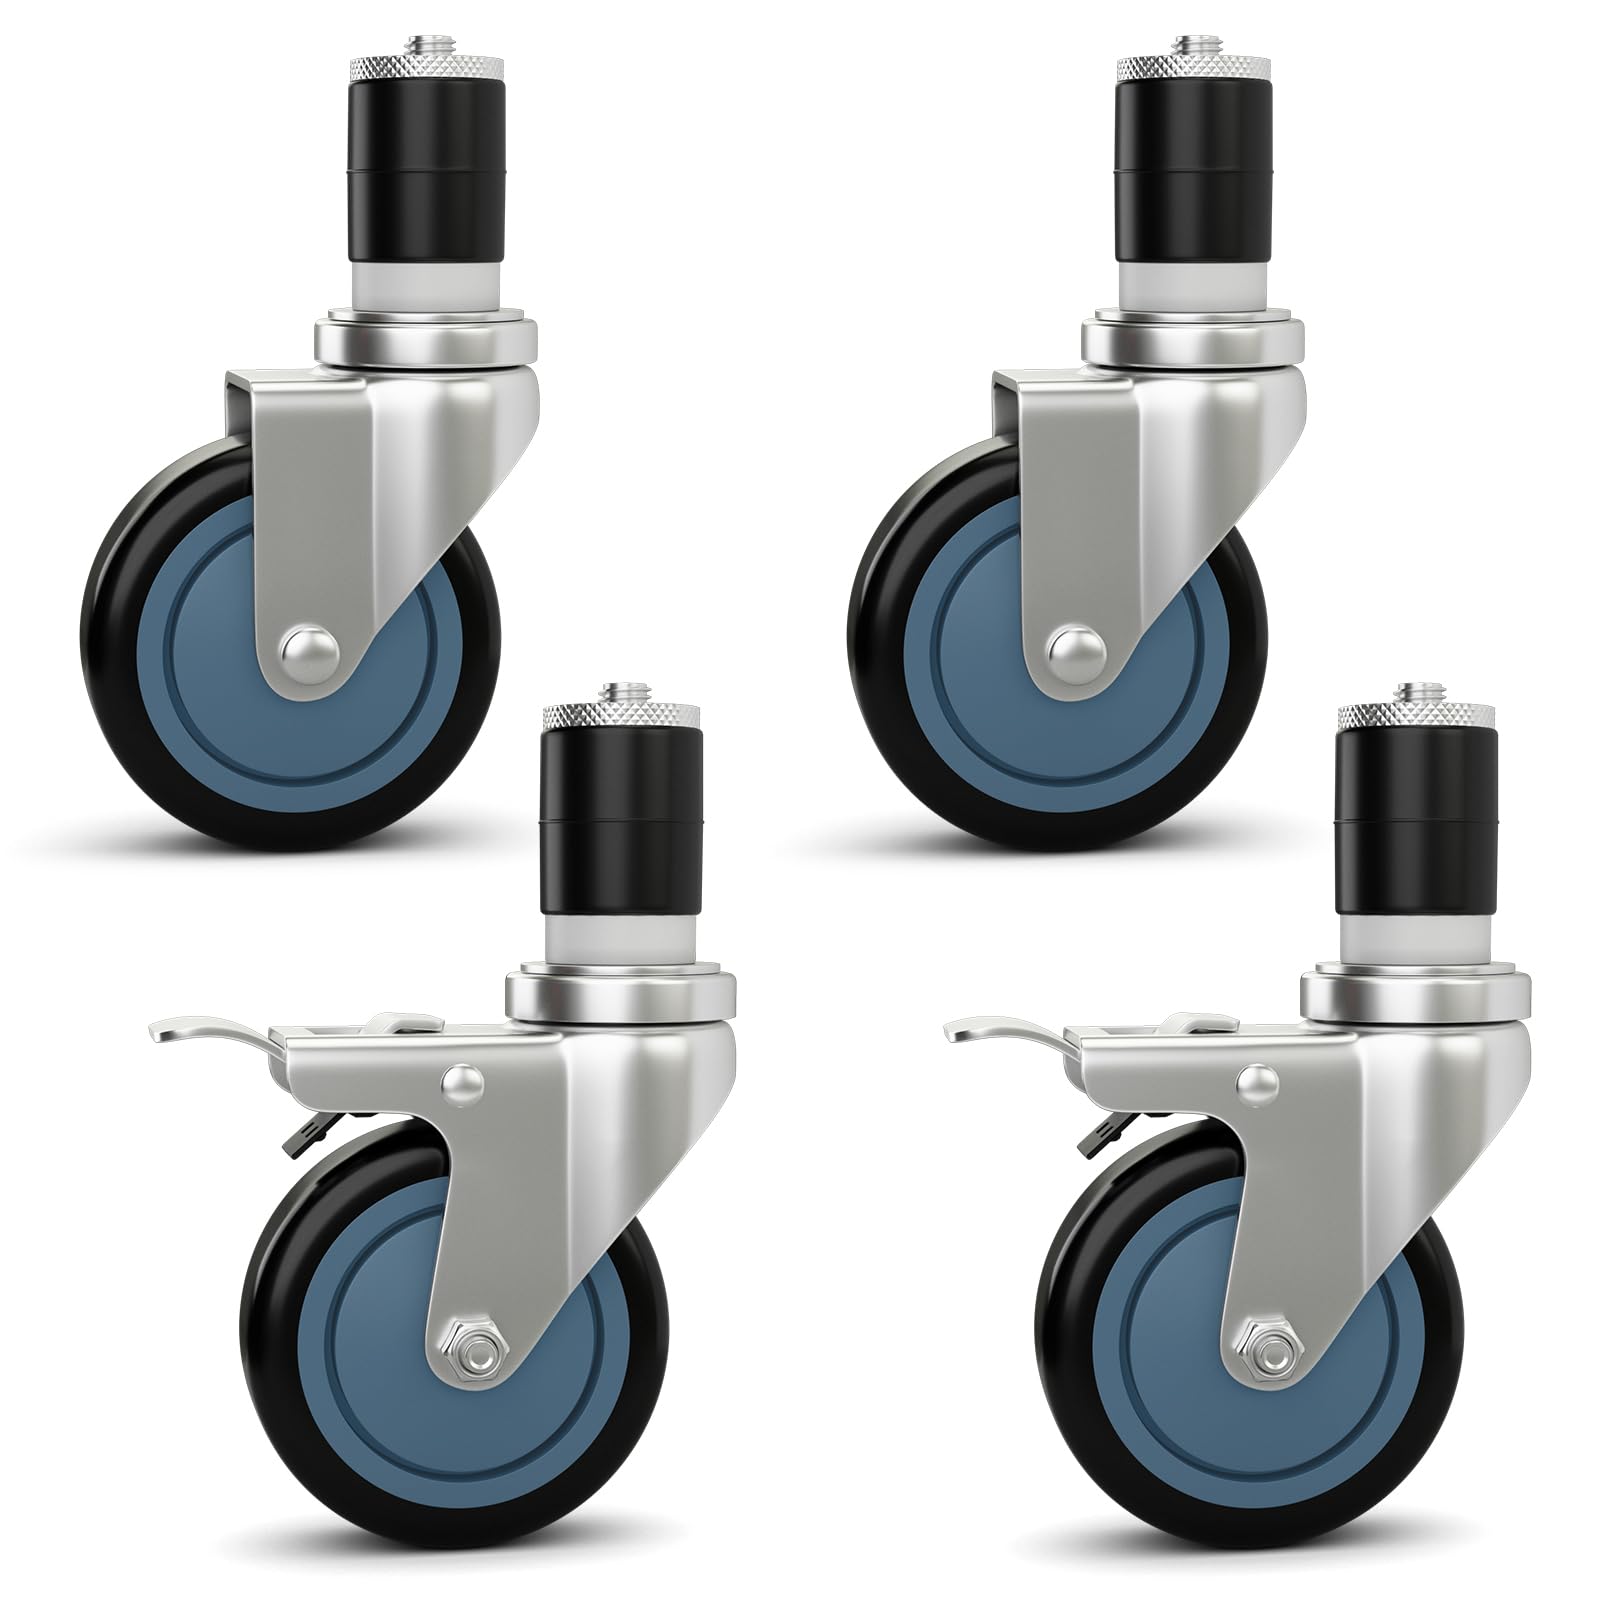 Giantex 4 Inch Caster Wheels Pack of 4